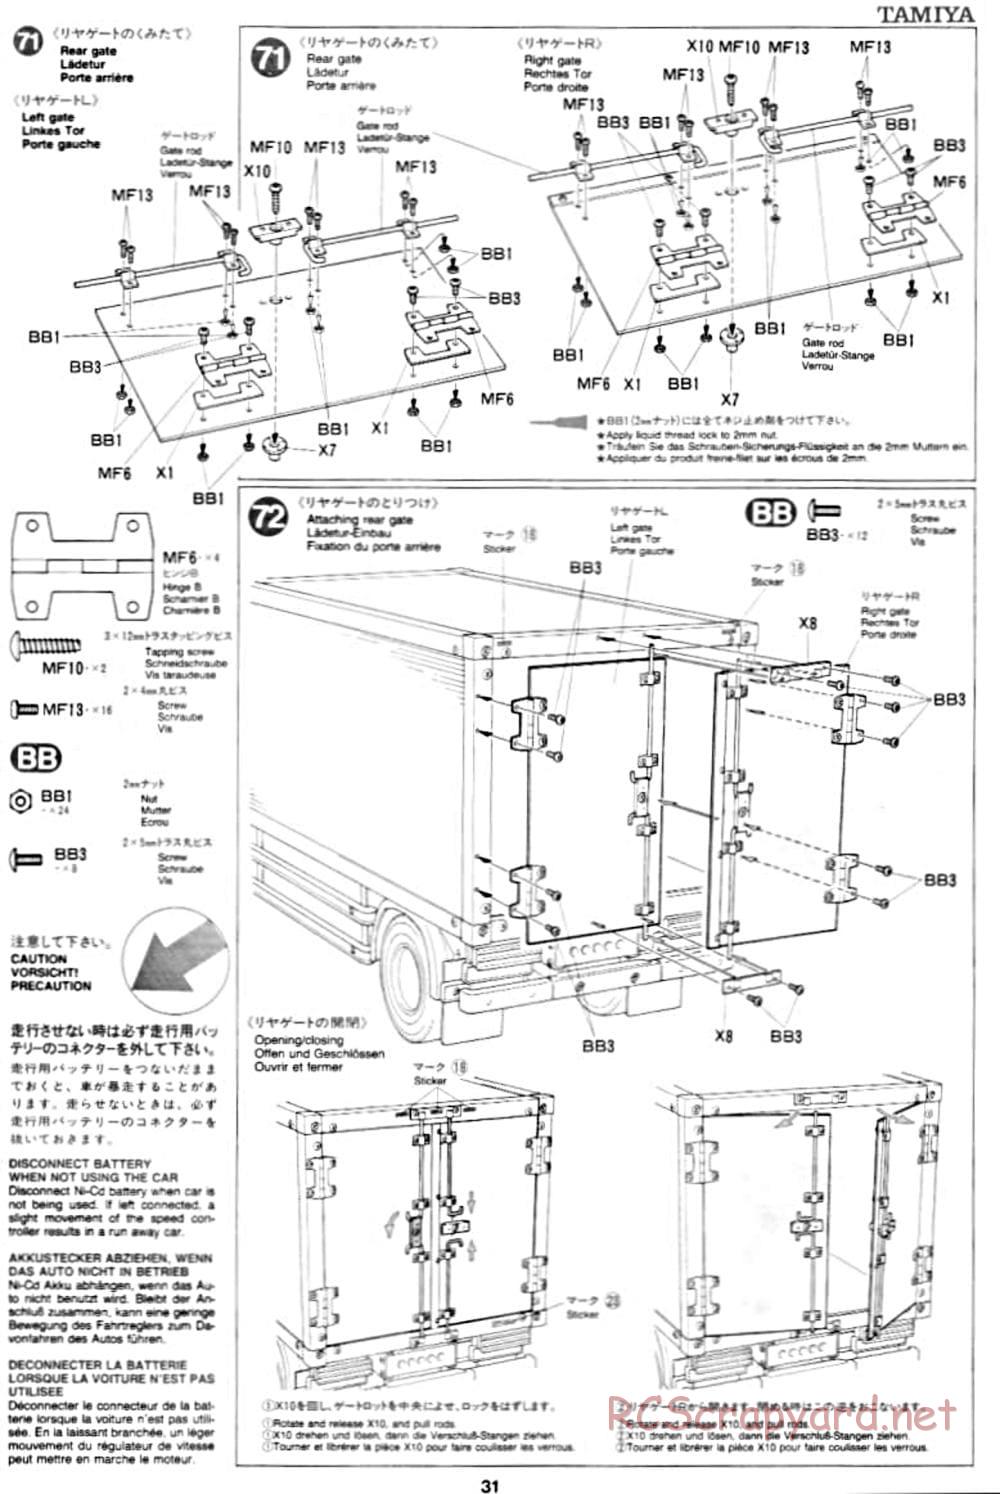 Tamiya - Mercedes-Benz 1850L Delivery Truck - Manual - Page 31